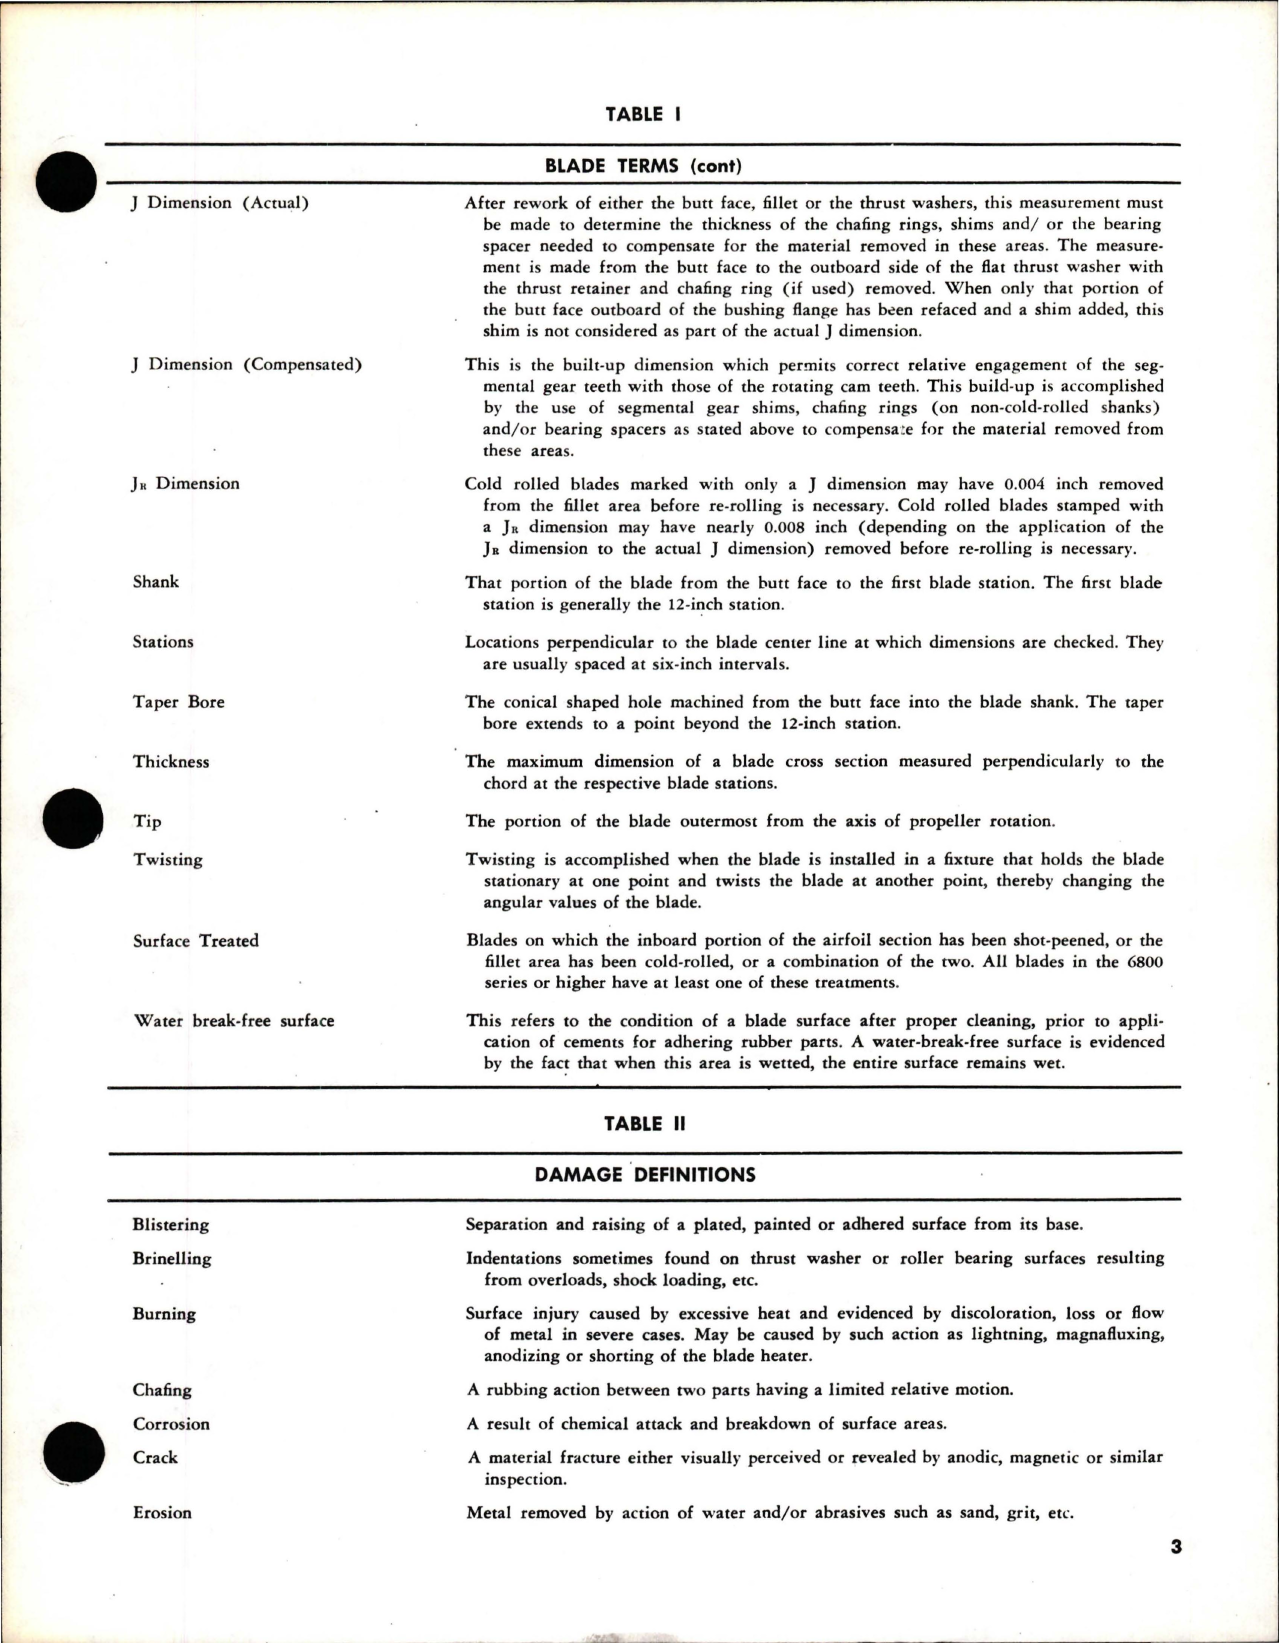 Sample page 9 from AirCorps Library document: Overhaul Manual for Aluminum Blade 